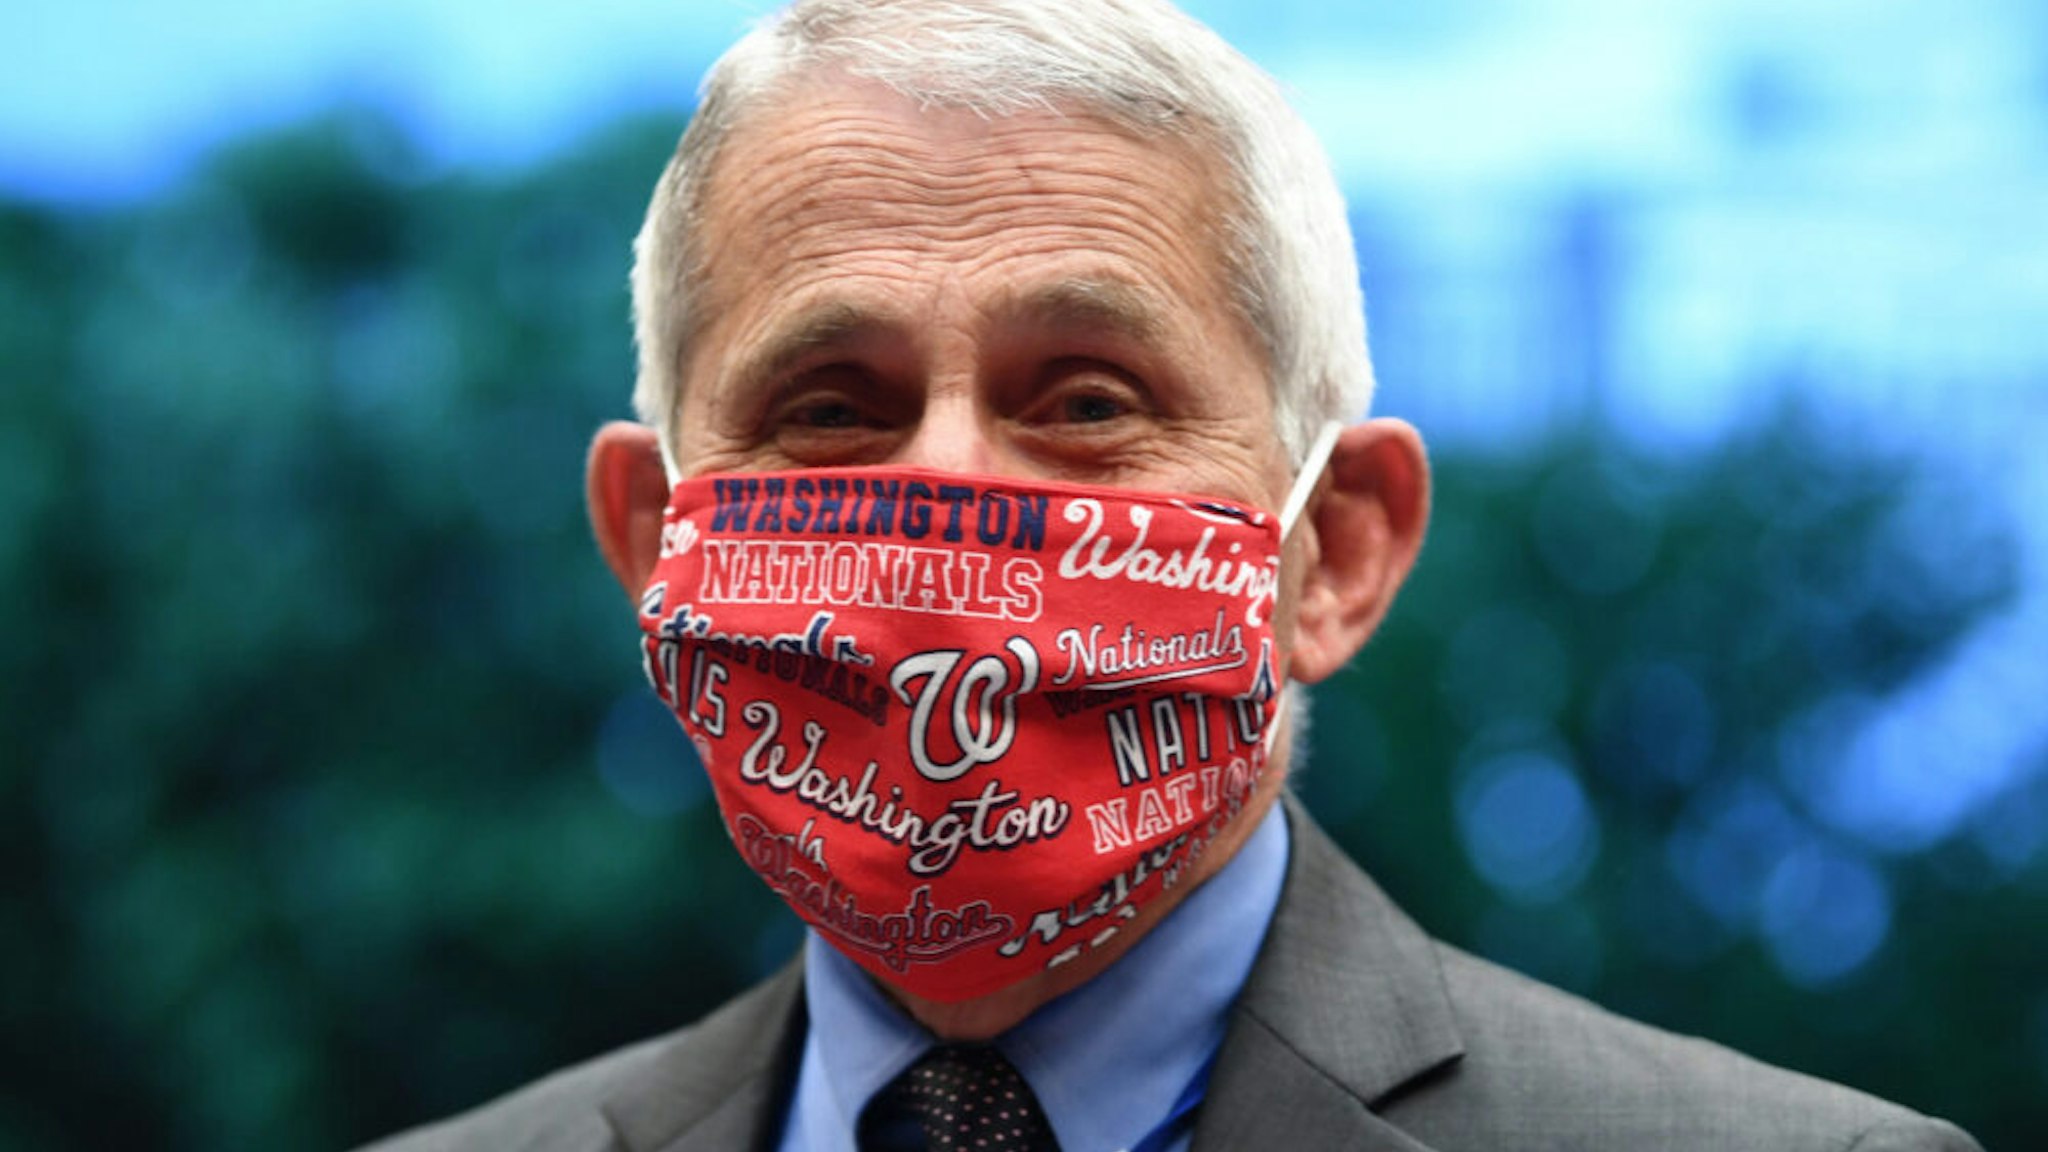 Director of the National Institute for Allergy and Infectious Diseases Dr. Anthony Fauci is see with a Washington Nationals face mask when he arrives to testify during the US Senate Health, Education, Labor, and Pensions Committee hearing to examine COVID-19, 'focusing on lessons learned to prepare for the next pandemic', on Capitol Hill in Washington, DC on June 23, 2020.